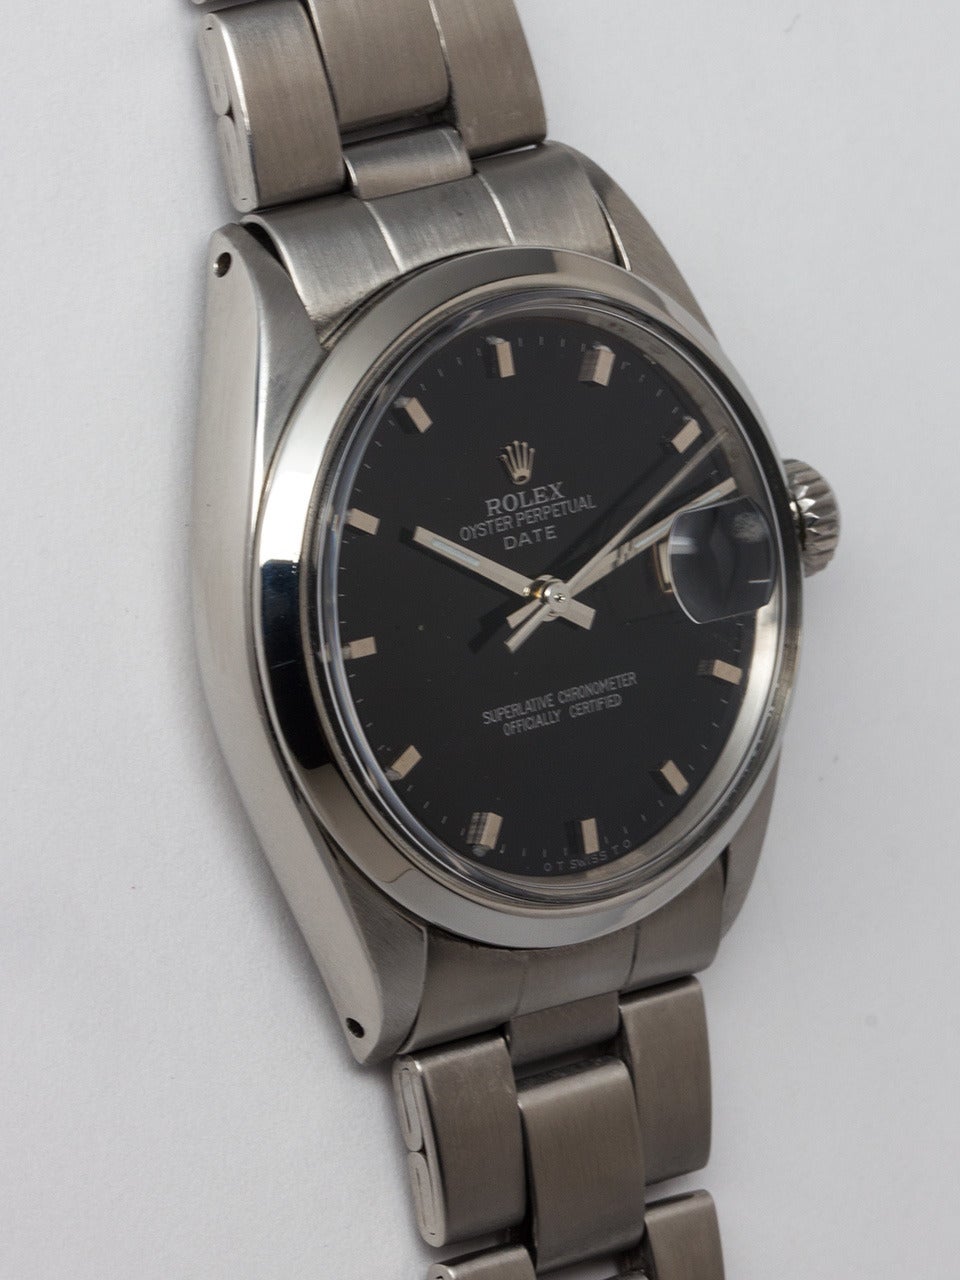 Rolex Stainless Steel Oyster Perpetual Date Wristwatch ref 1500 serial #2.2 million circa 1969. 34mm diameter case with smooth bezel and acrylic crystal. Glossy black dial with applied silver square indexes and hands. Powered by self winding